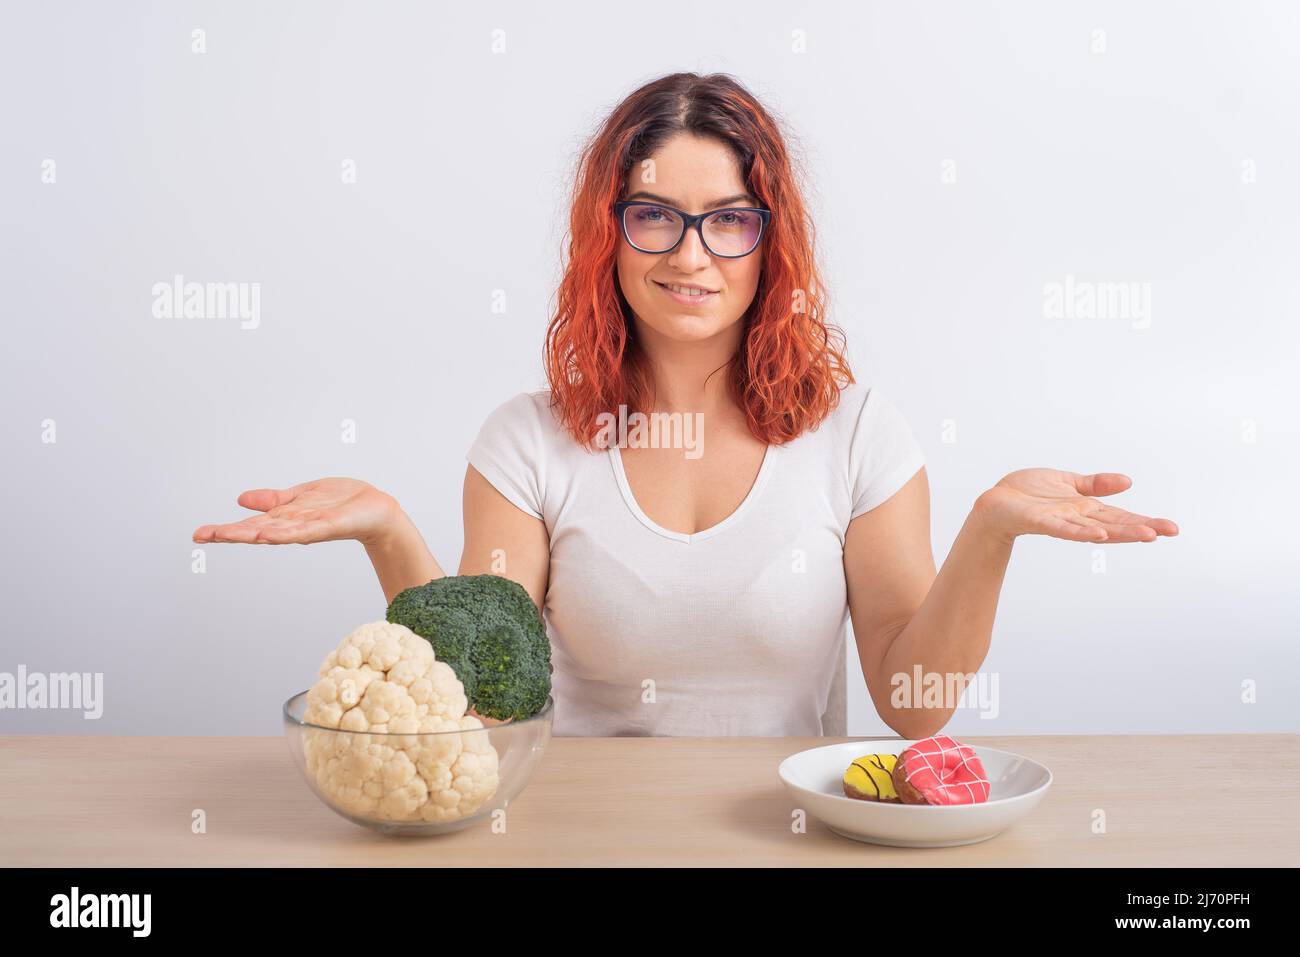 Caucasian woman prefers healthy food. Redhead girl chooses between broccoli and donuts on white background. Stock Photo